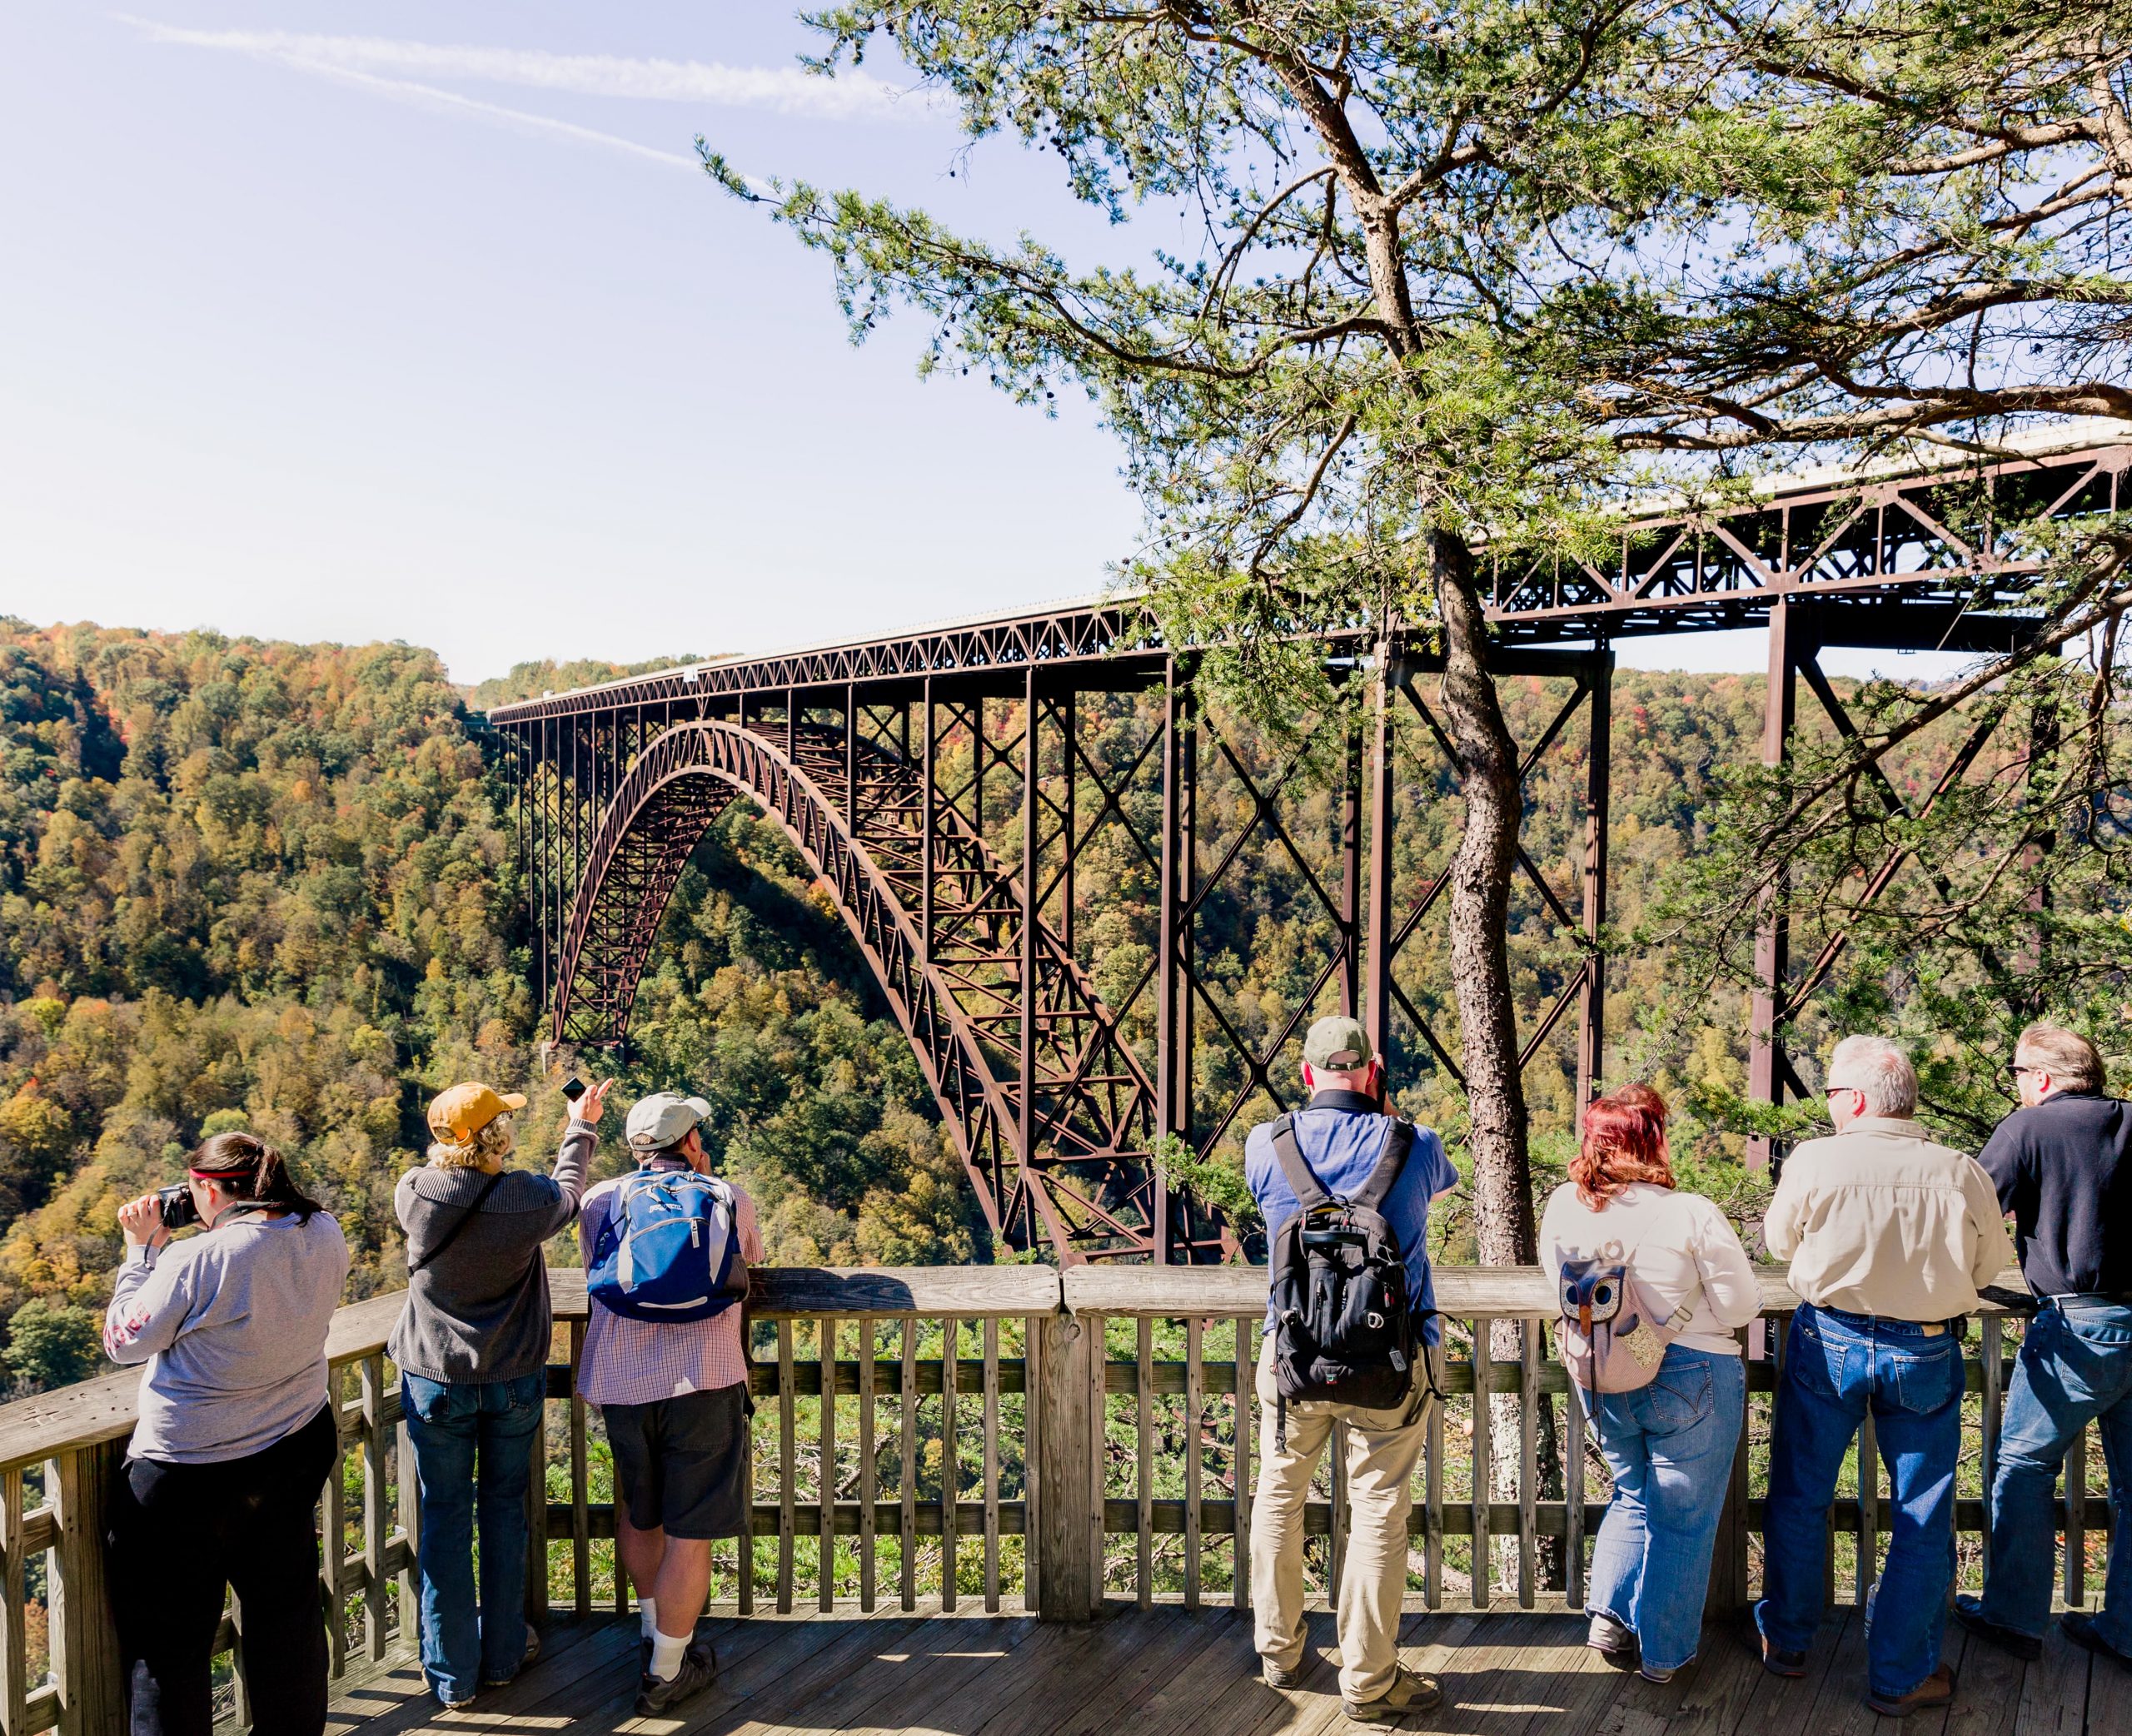 6 Ways to Experience the New River Gorge Bridge - Visit Southern